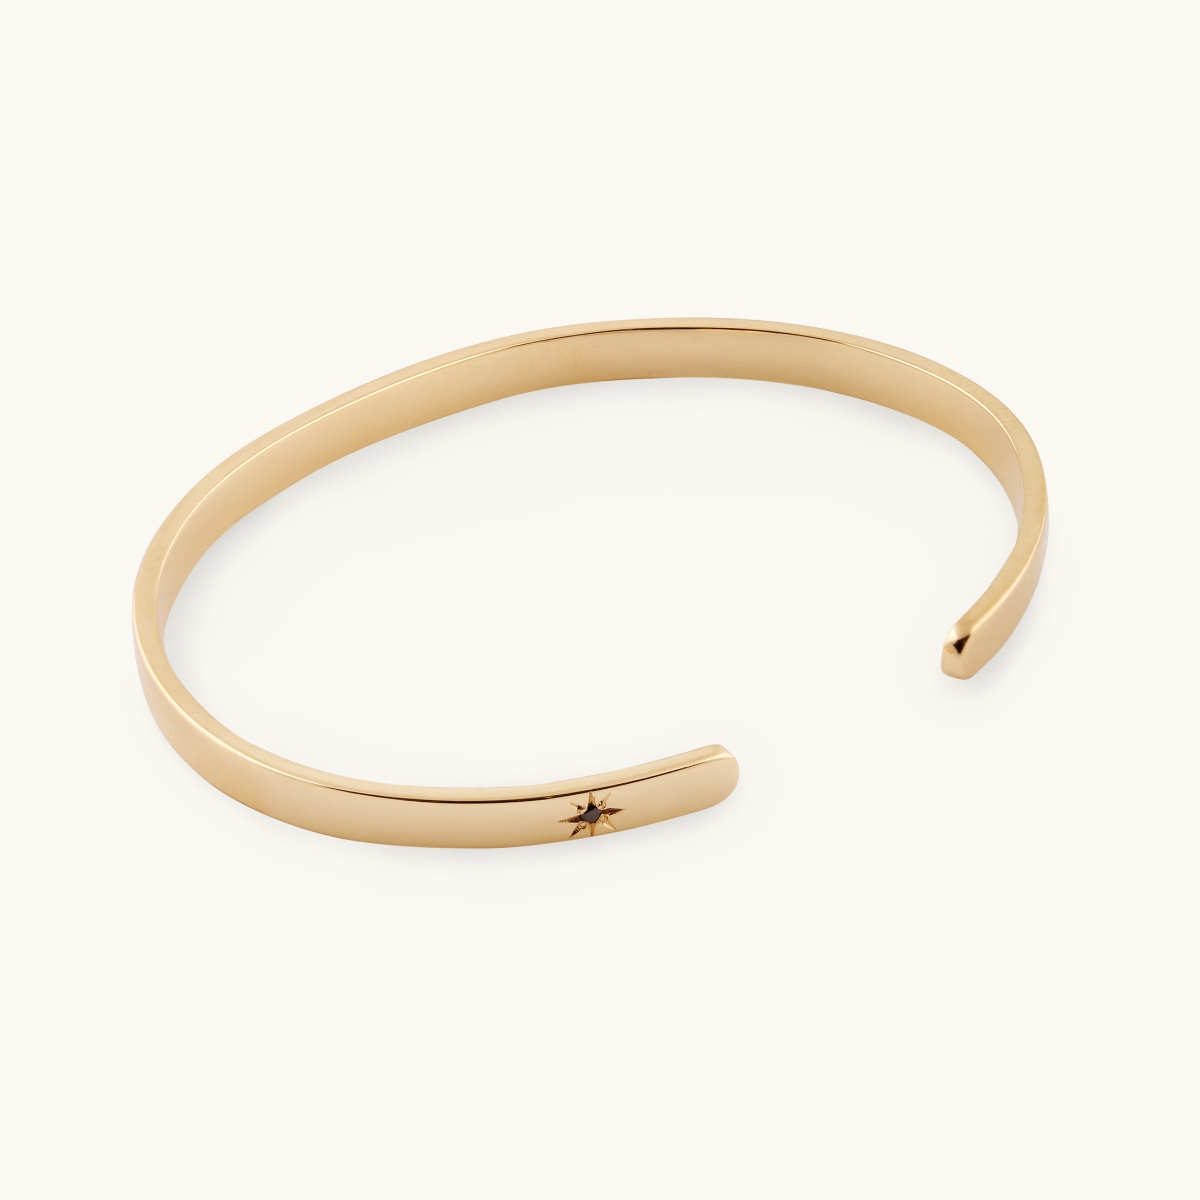 A bangle in 18K gold with a black diamond with a star frame